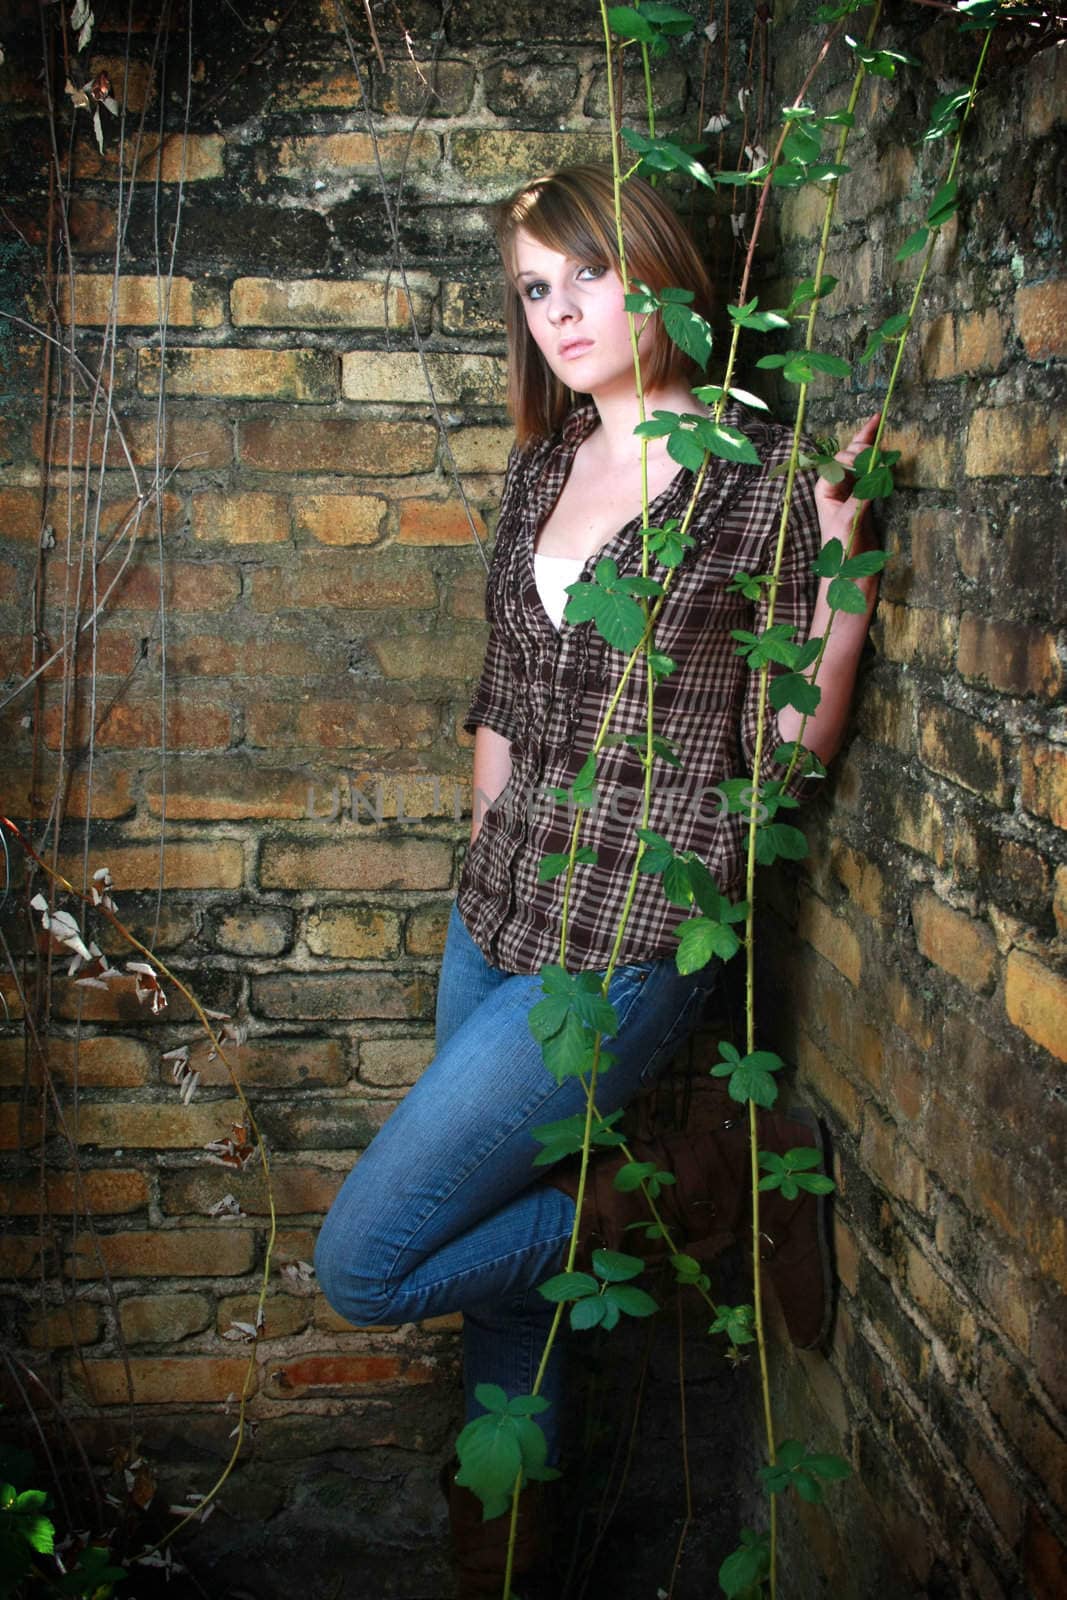 Young woman standing in corner with some vines